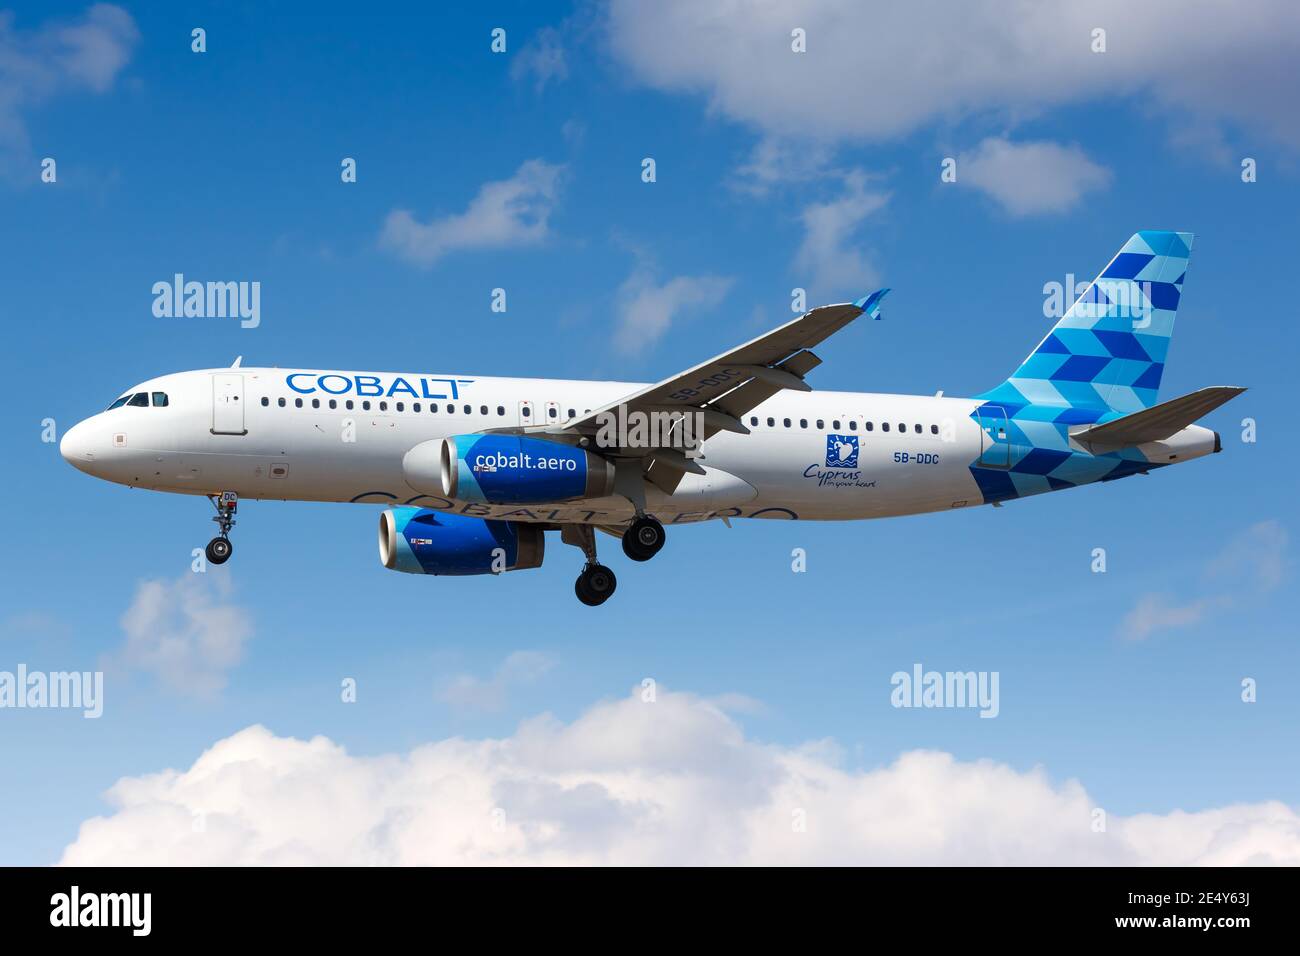 London, United Kingdom - July 31, 2018: Cobalt Airbus A320 airplane at London Heathrow airport (LHR) in the United Kingdom. Stock Photo